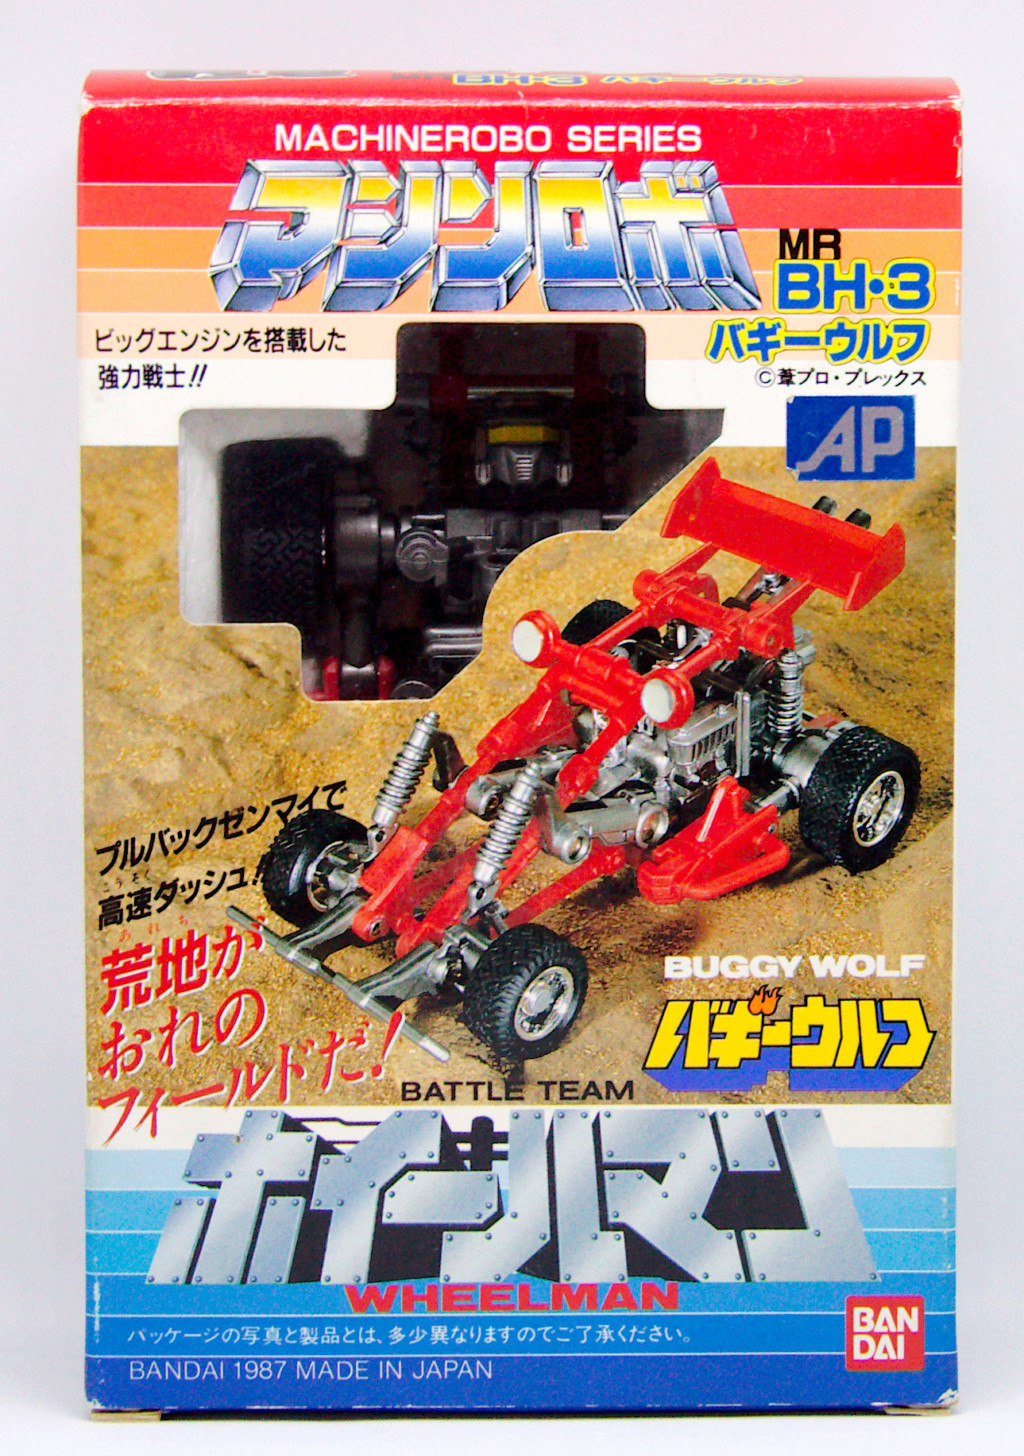 Pilgrim's collection (Gobots, Transformers...) - Page 28 Img_8531